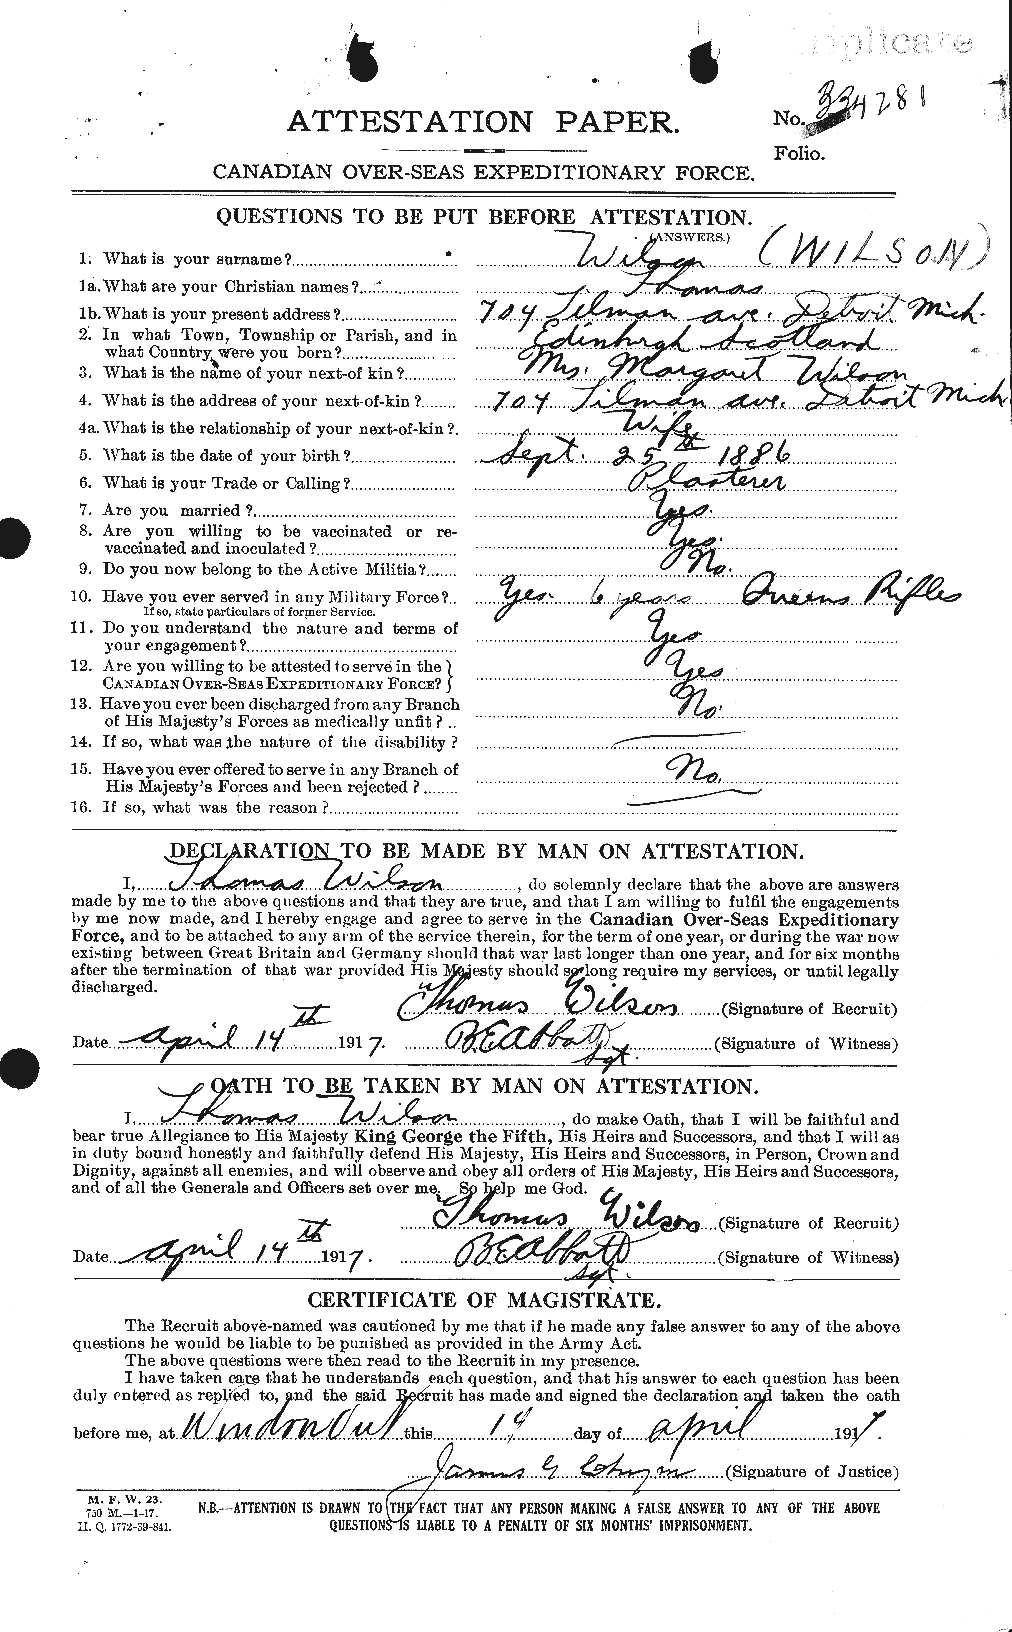 Personnel Records of the First World War - CEF 681207a